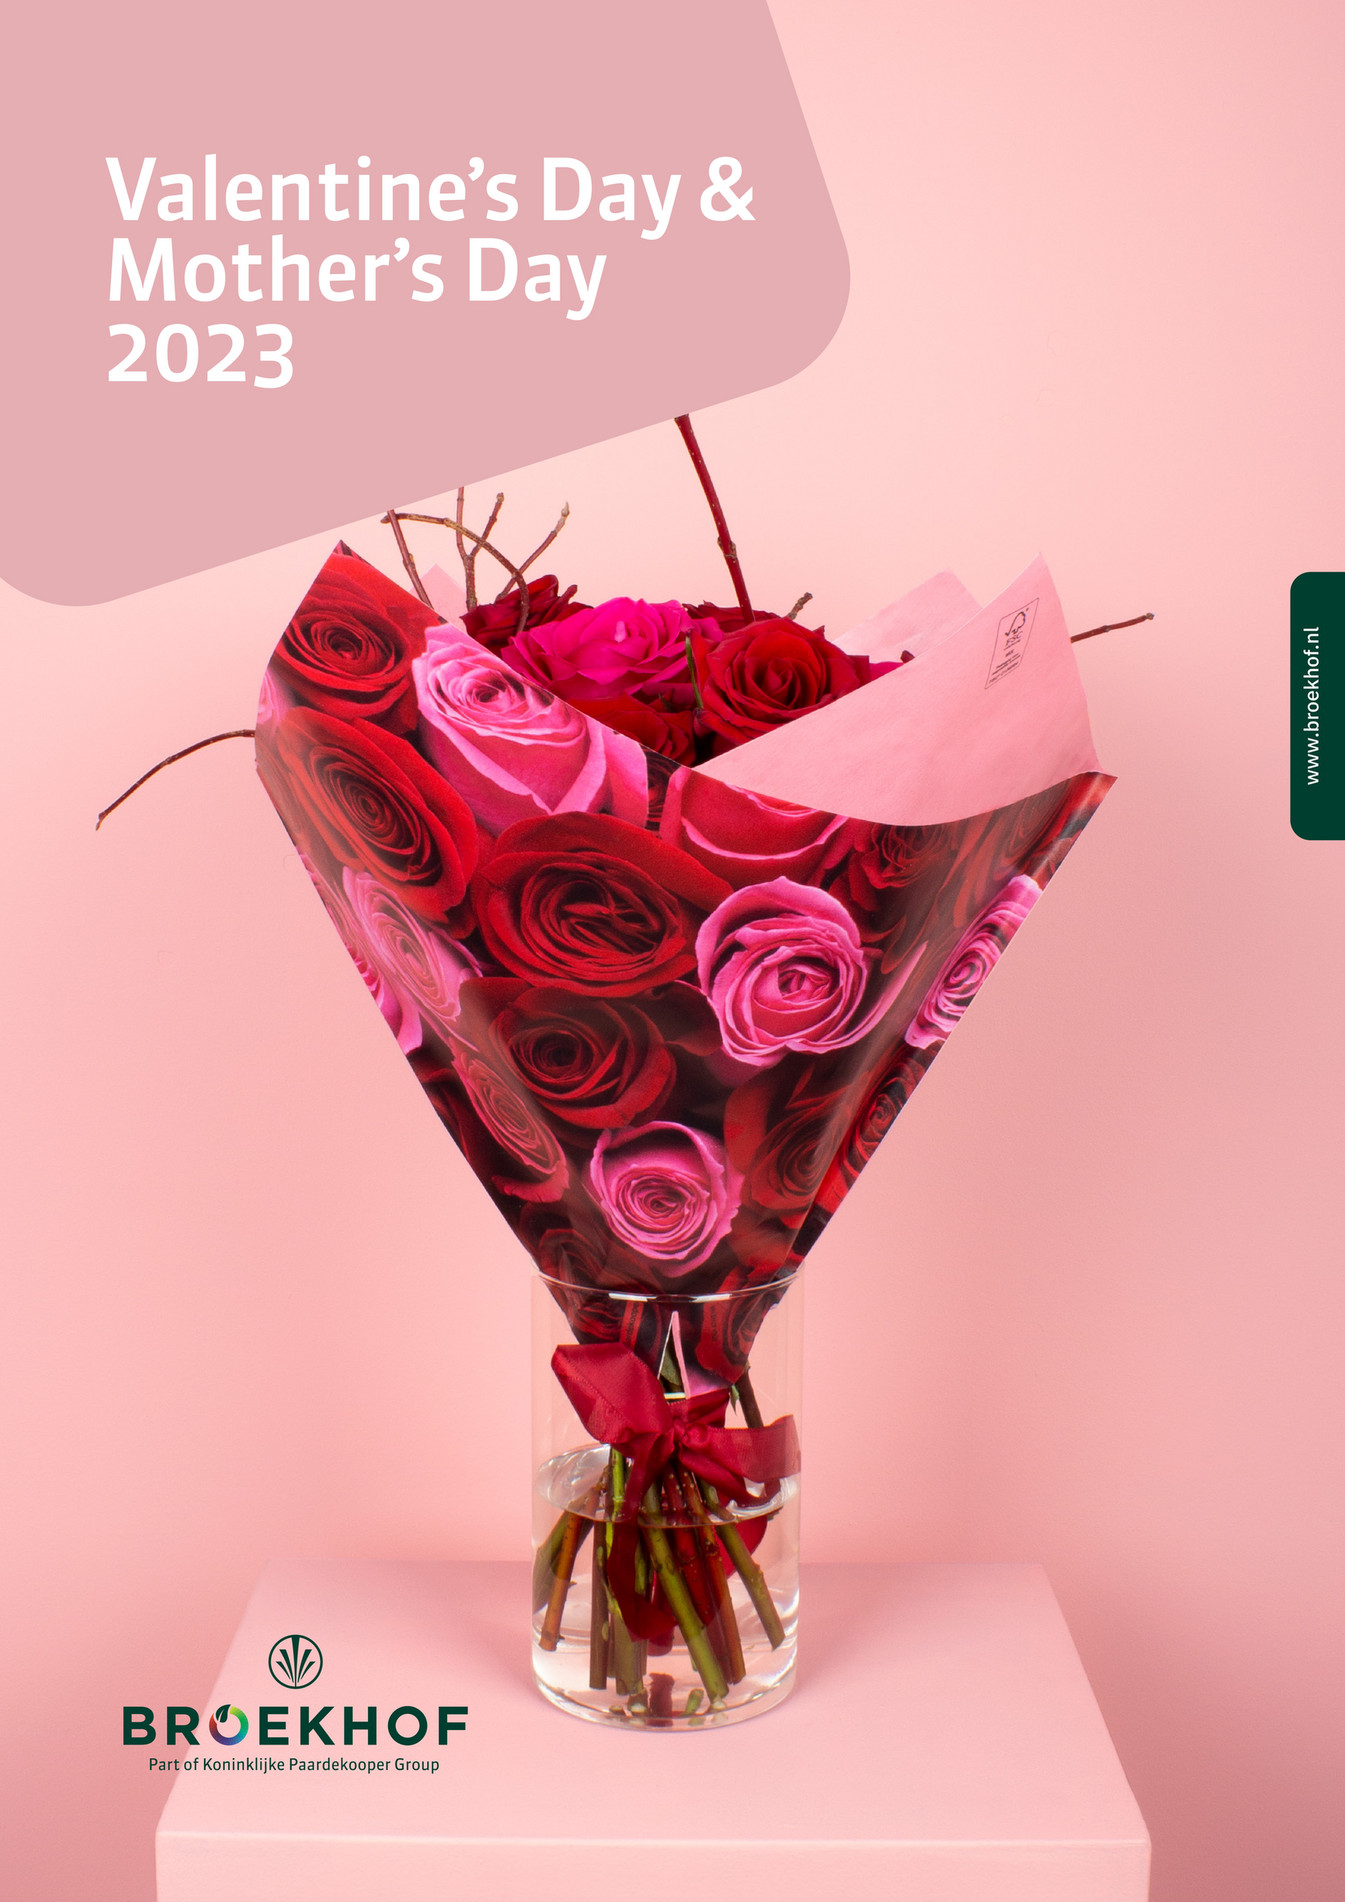 broekhof-brochure-valentine-s-day-and-mother-s-day-2023-page-6-7